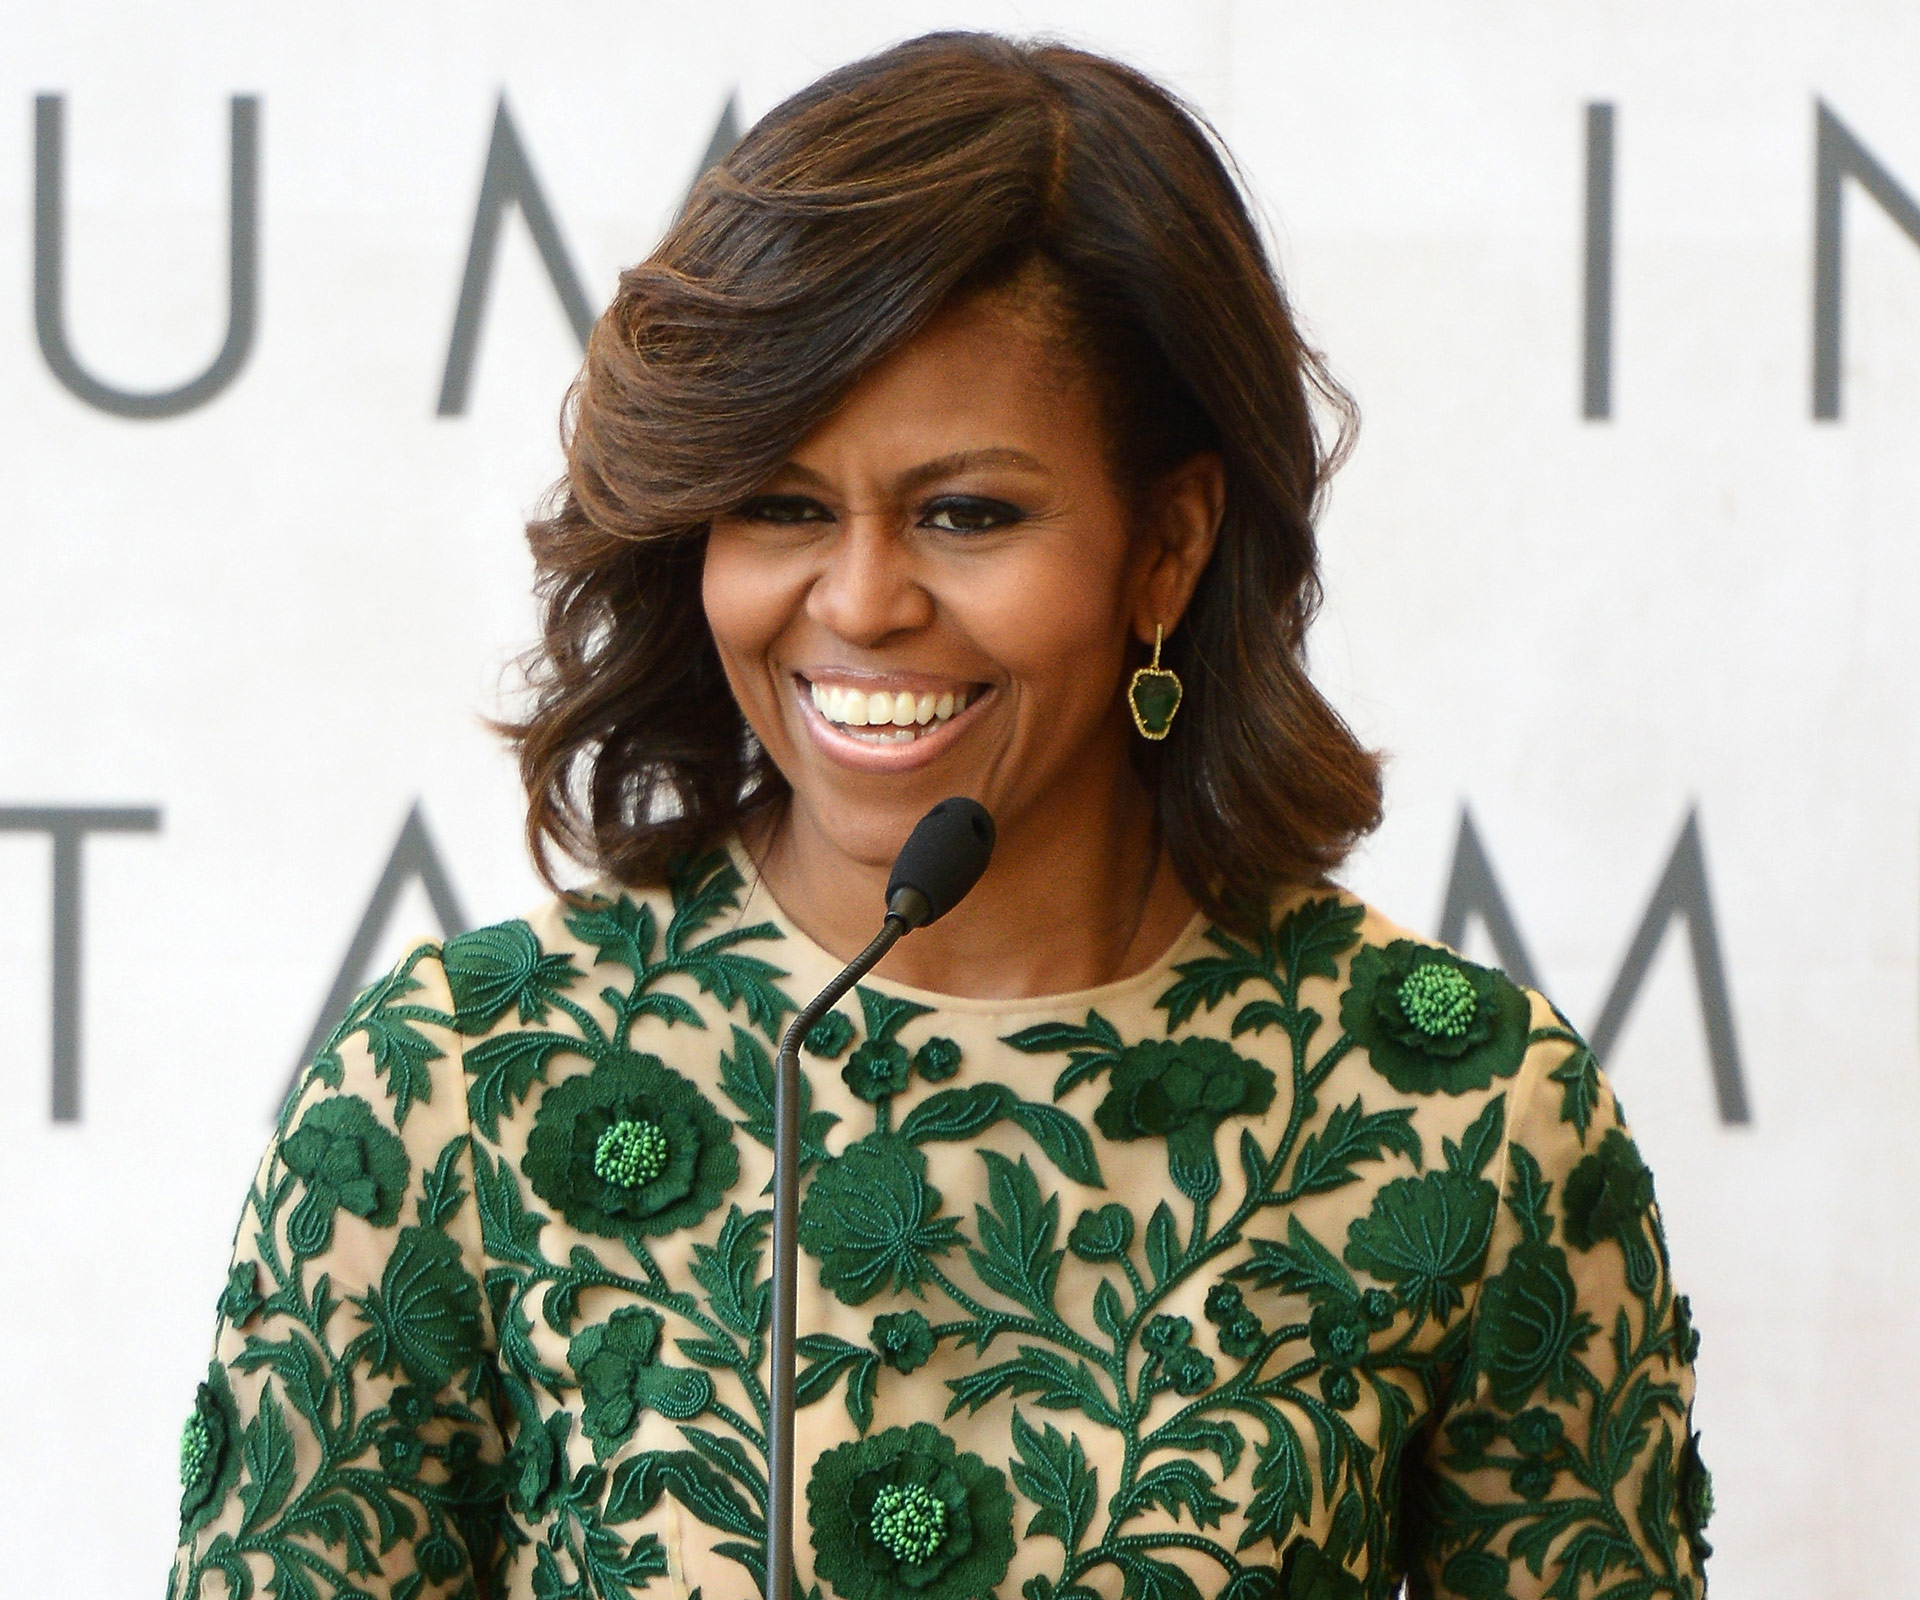 ‘Ape in heels’: US mayor quits over racist Michelle Obama comment